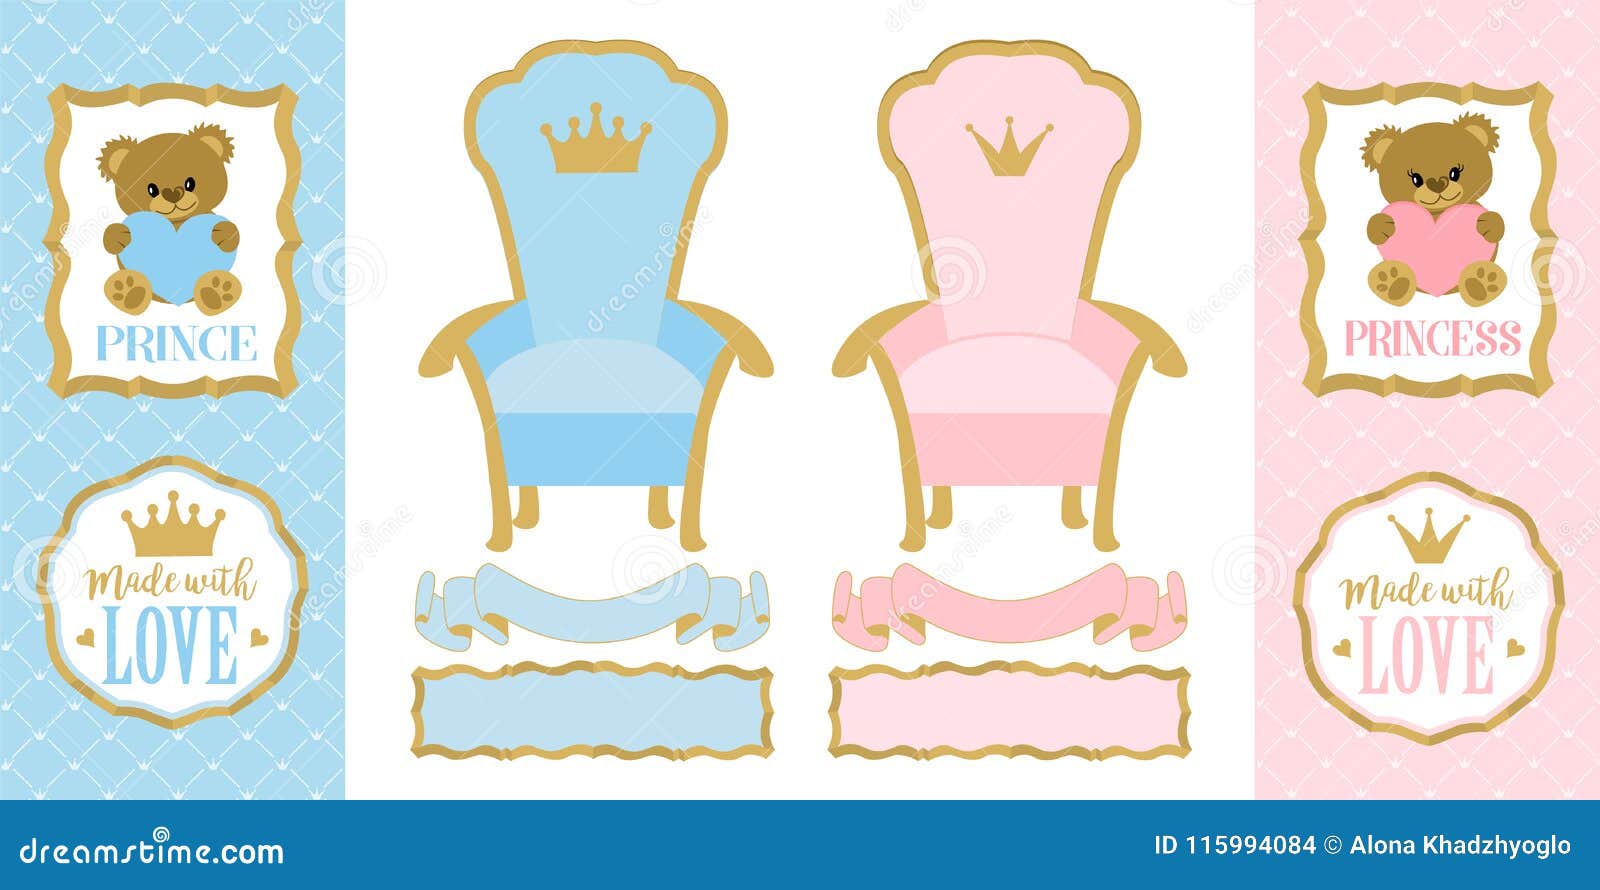 Throne Chair For Princess And Prince Set Of Cute Elements Of